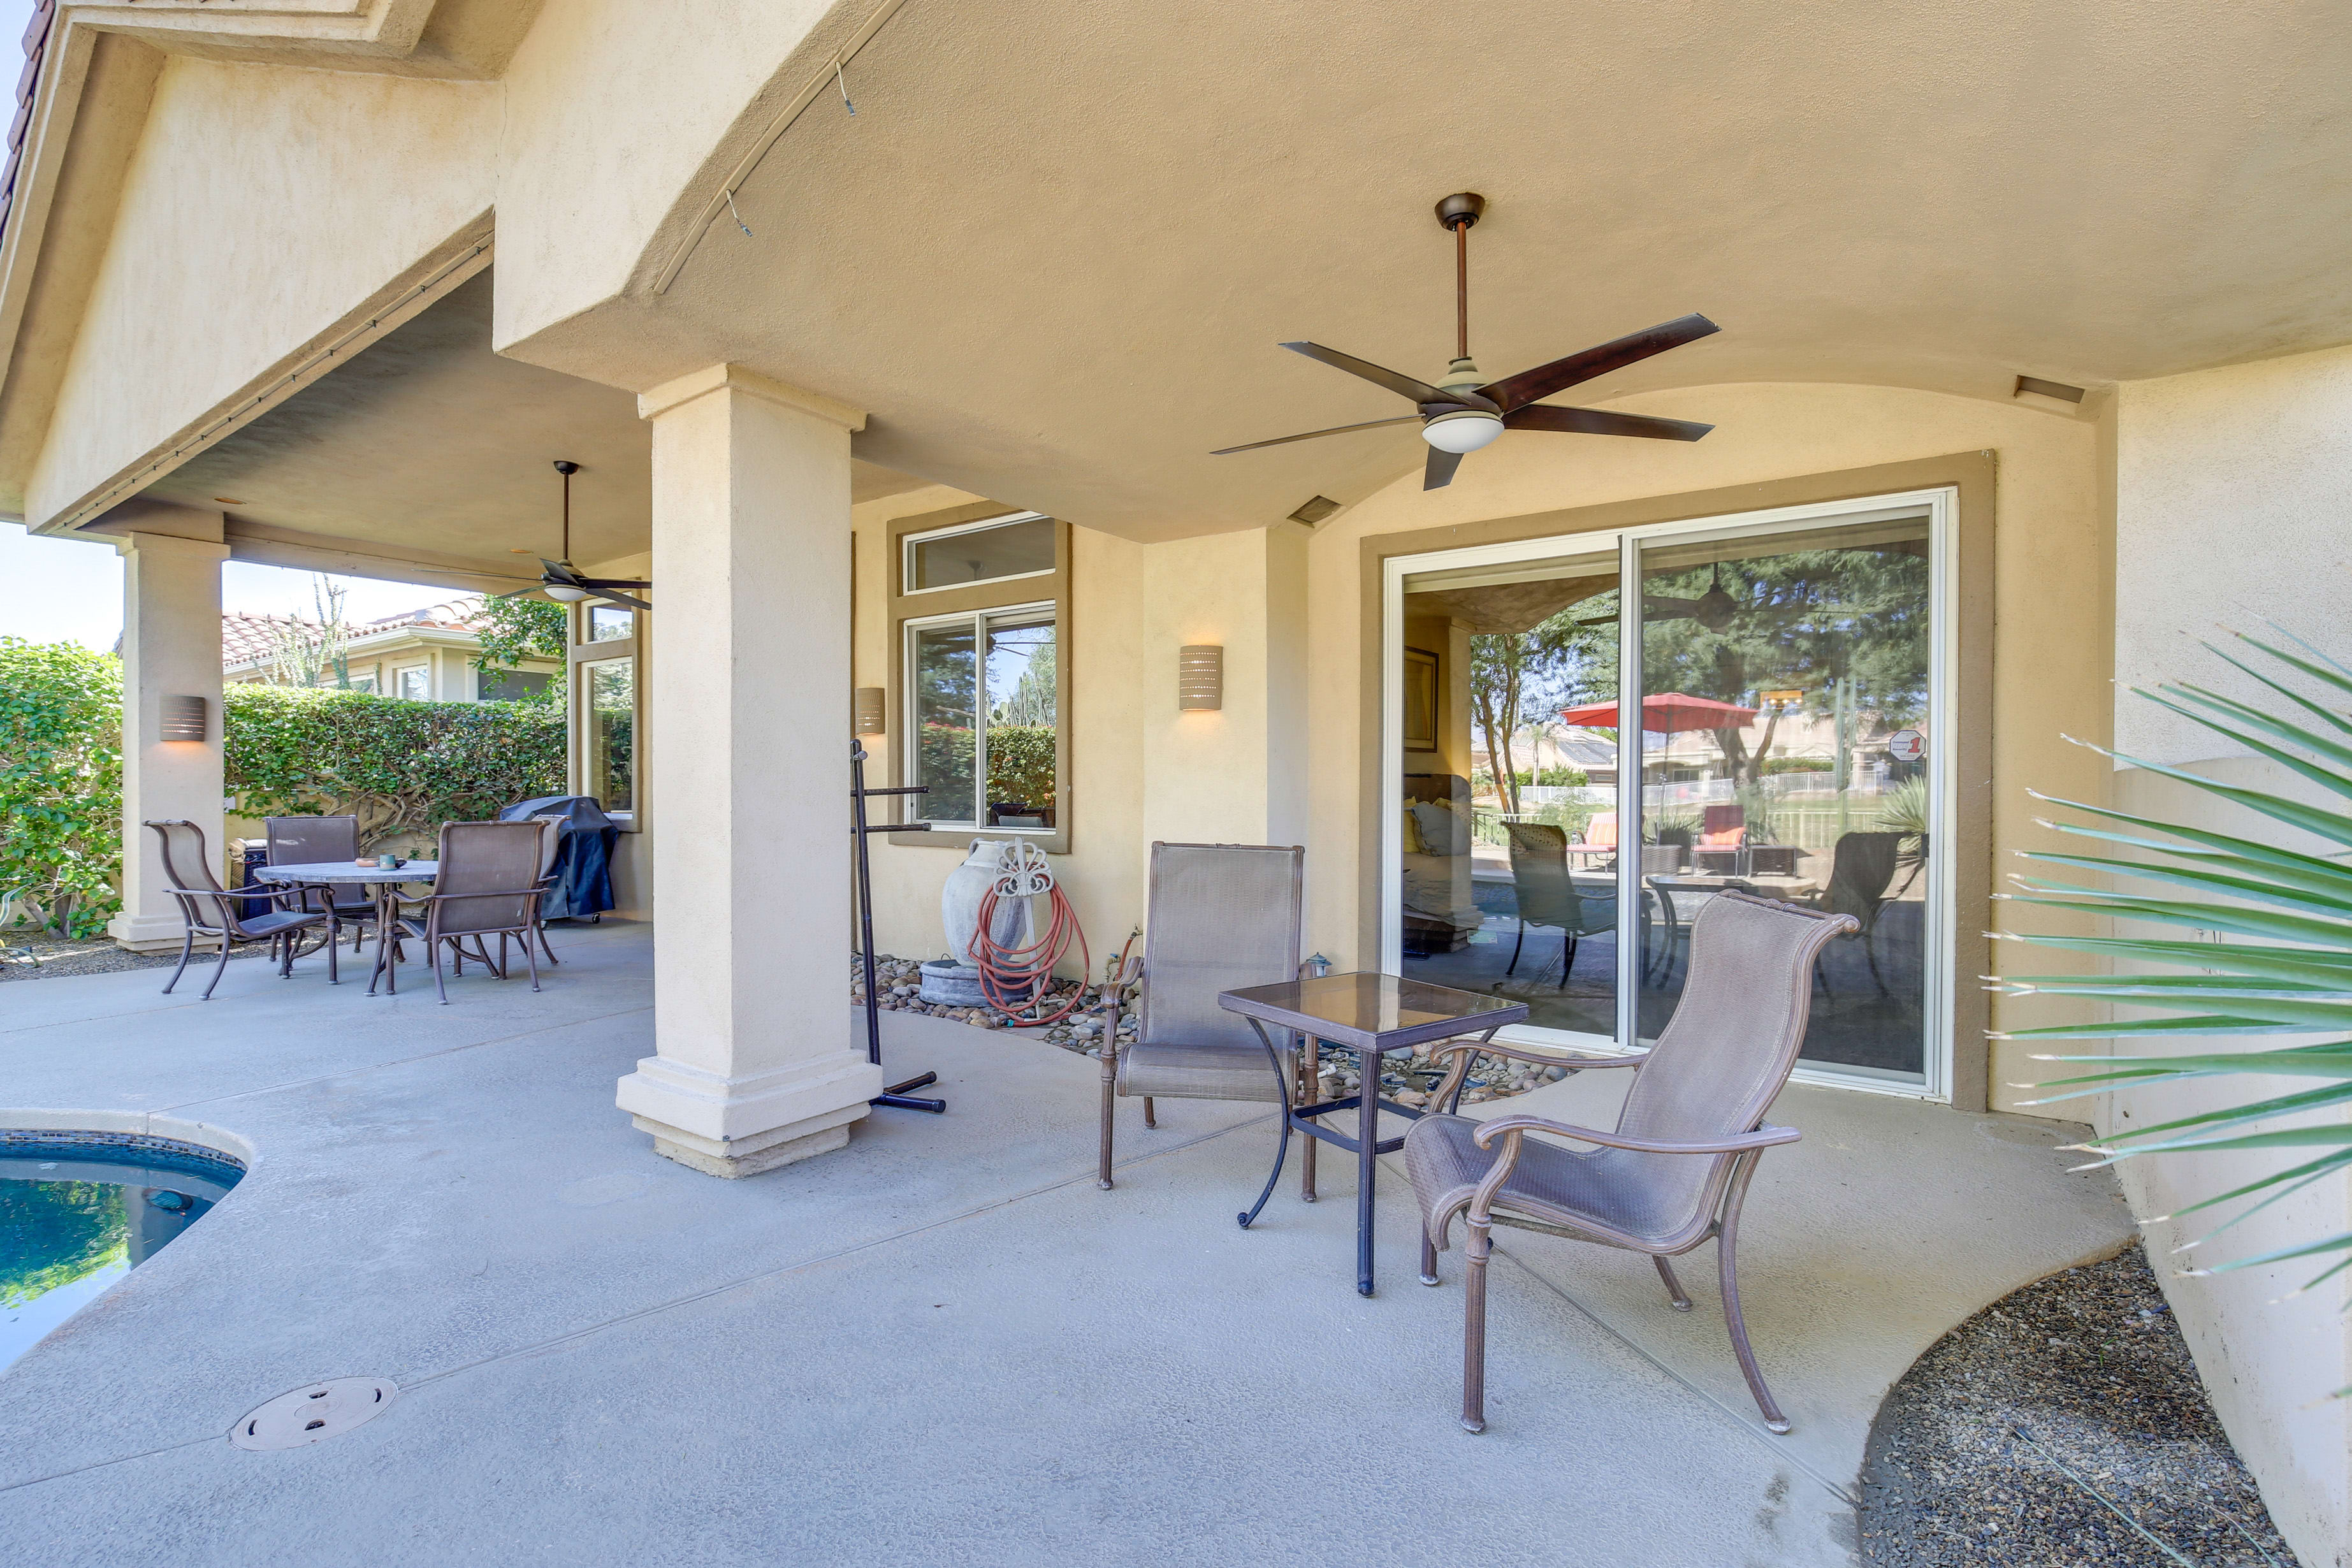 Covered Patio | Outdoor Dining | Gas Grill (Starter Propane Provided)